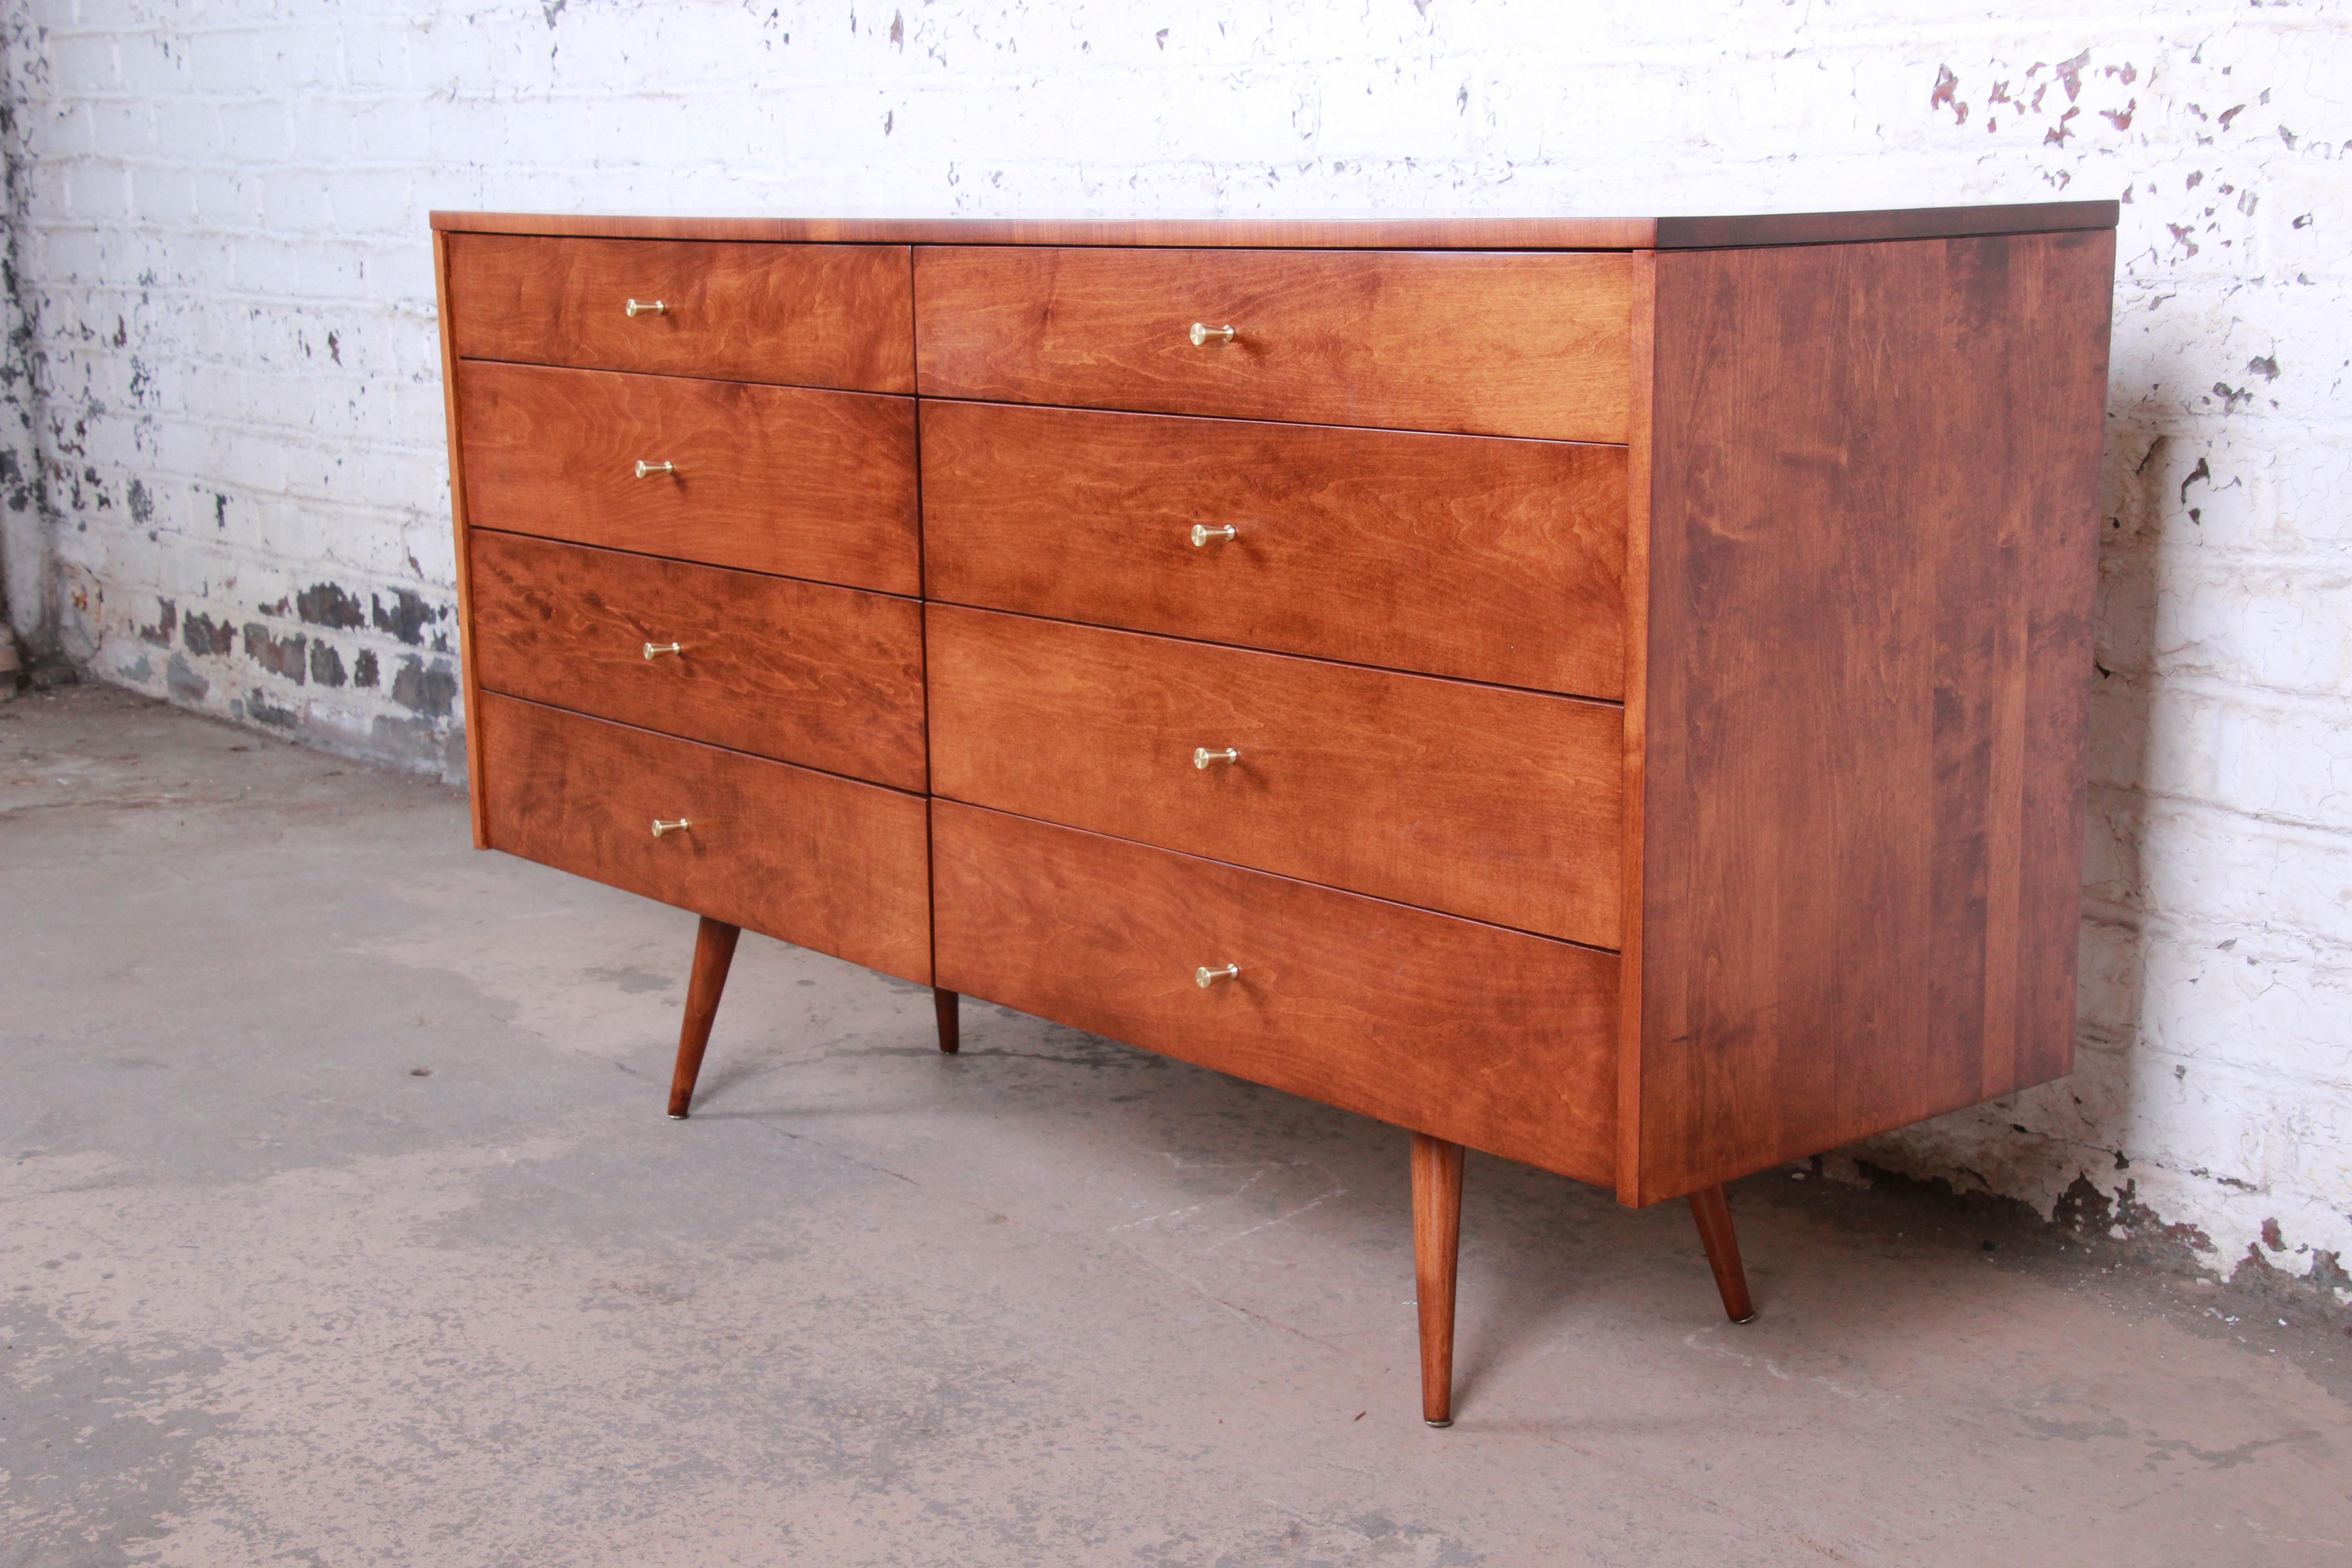 An exceptional Mid-Century Modern long dresser or credenza from the Planner Group line by Paul McCobb for Winchendon Furniture. The dresser features solid maple construction with gorgeous wood grain. It has clean, sleek midcentury lines--an